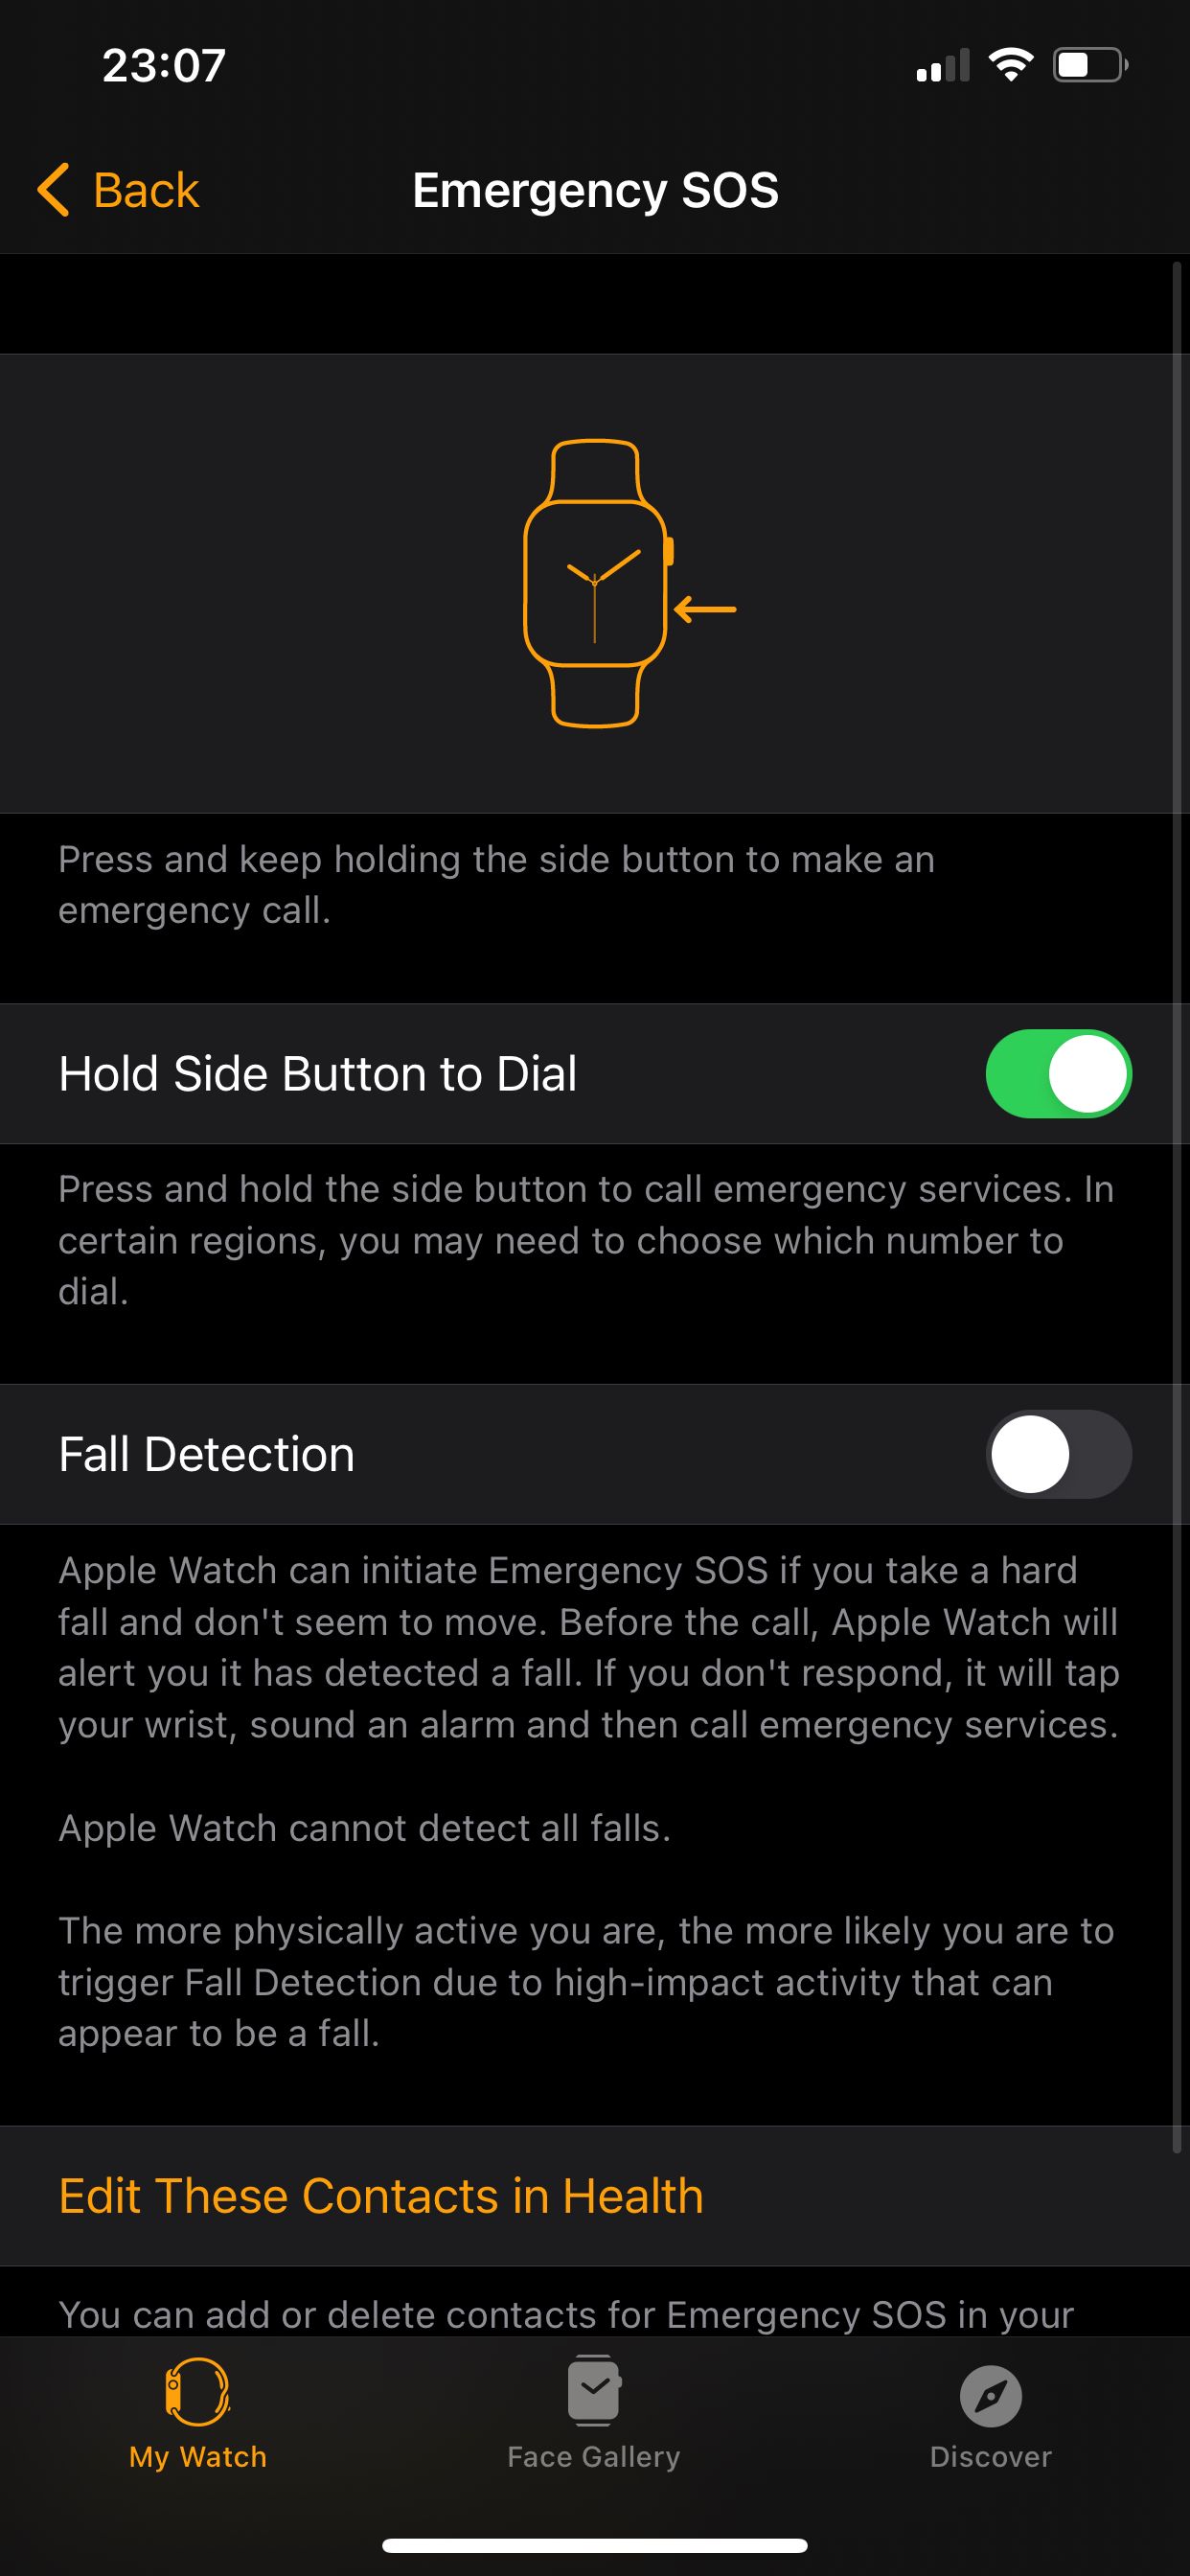 The Fall Detection feature of the Apple Watch can alert your emergency contacts and emergency services, if you have a hard fall and need help.